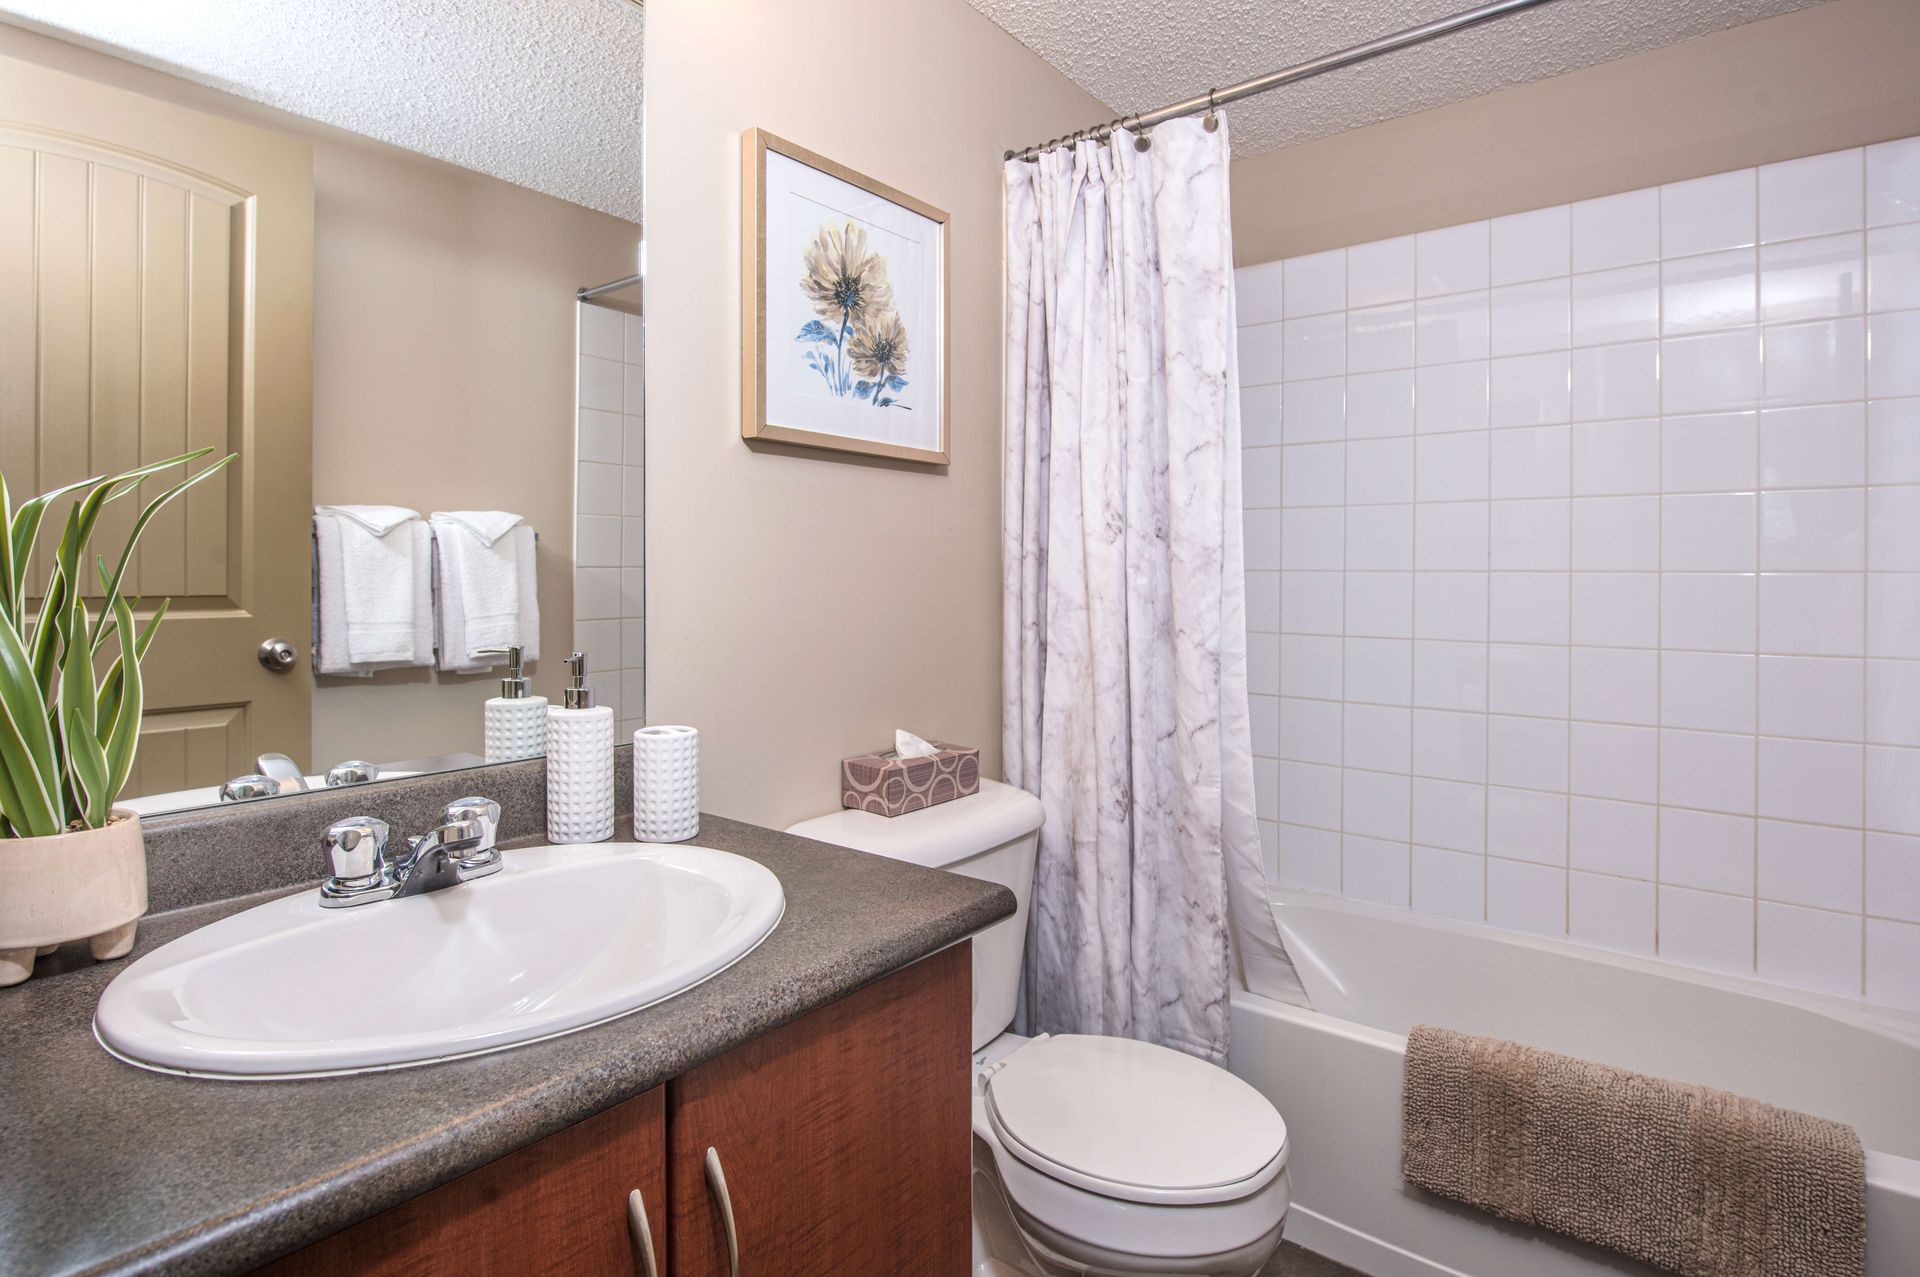 Second bathroom at the Lake Windermere Pointe Condos in Invermere, BC managed by Aisling Baile Property Management